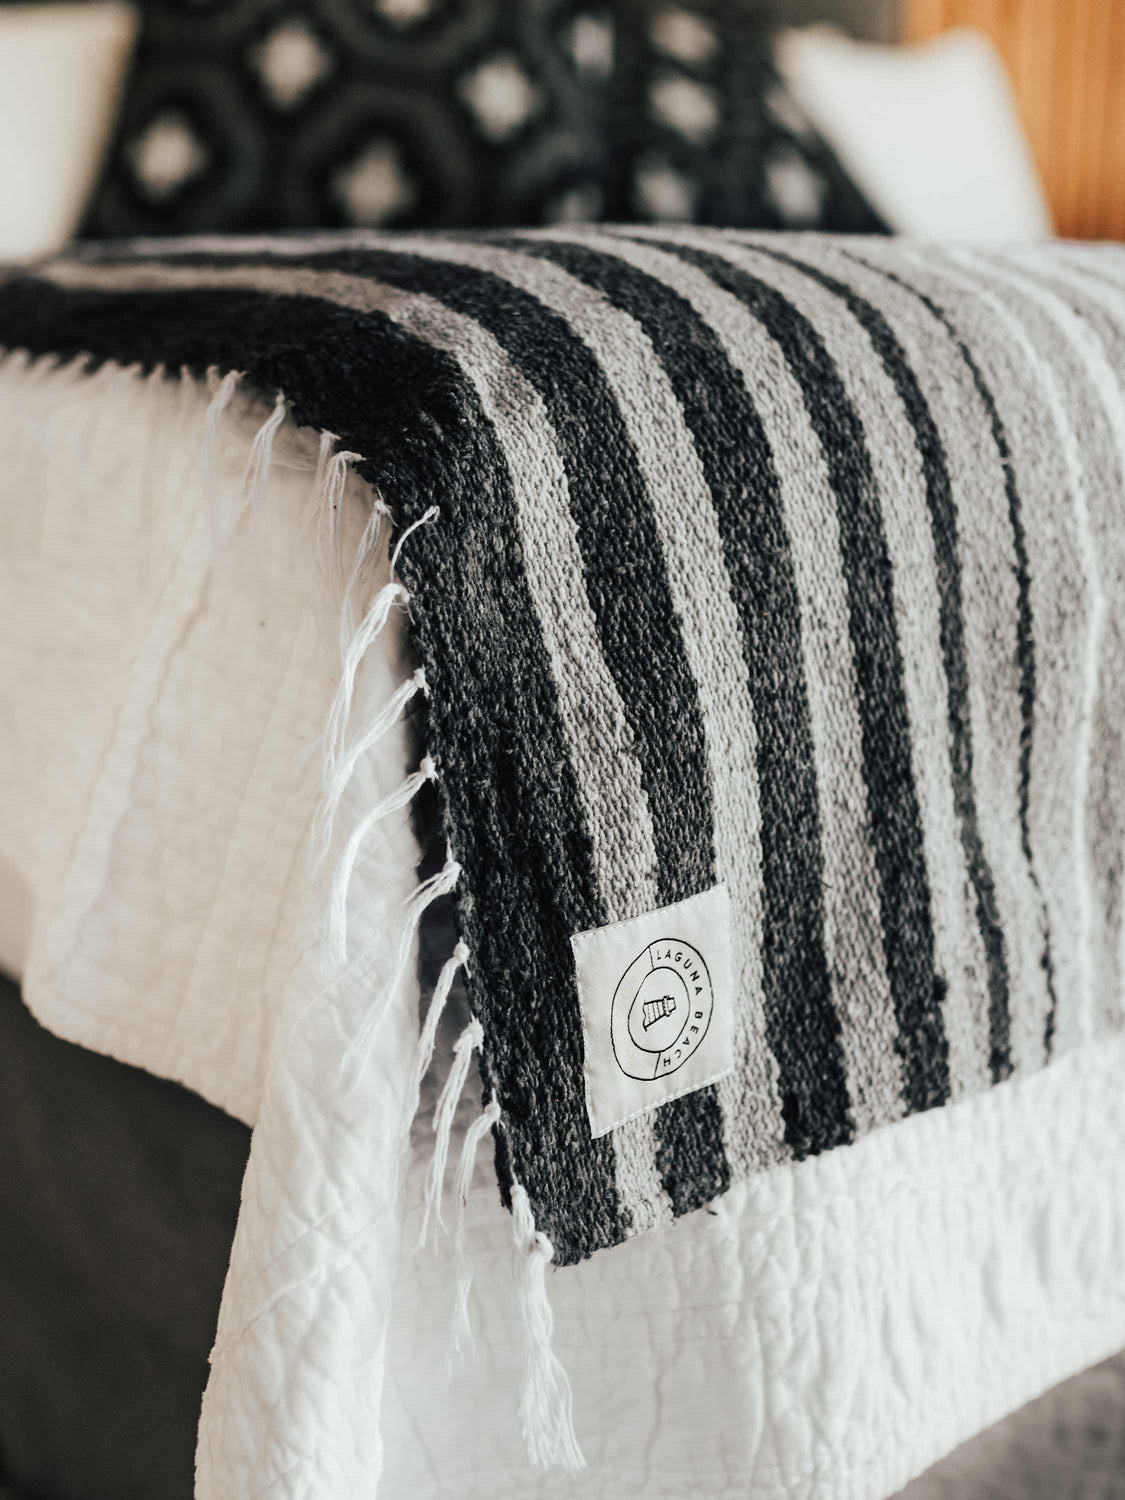 Close-up of a large, gray and white striped Mexican throw blanket decoratively draped over the foot of a bed.